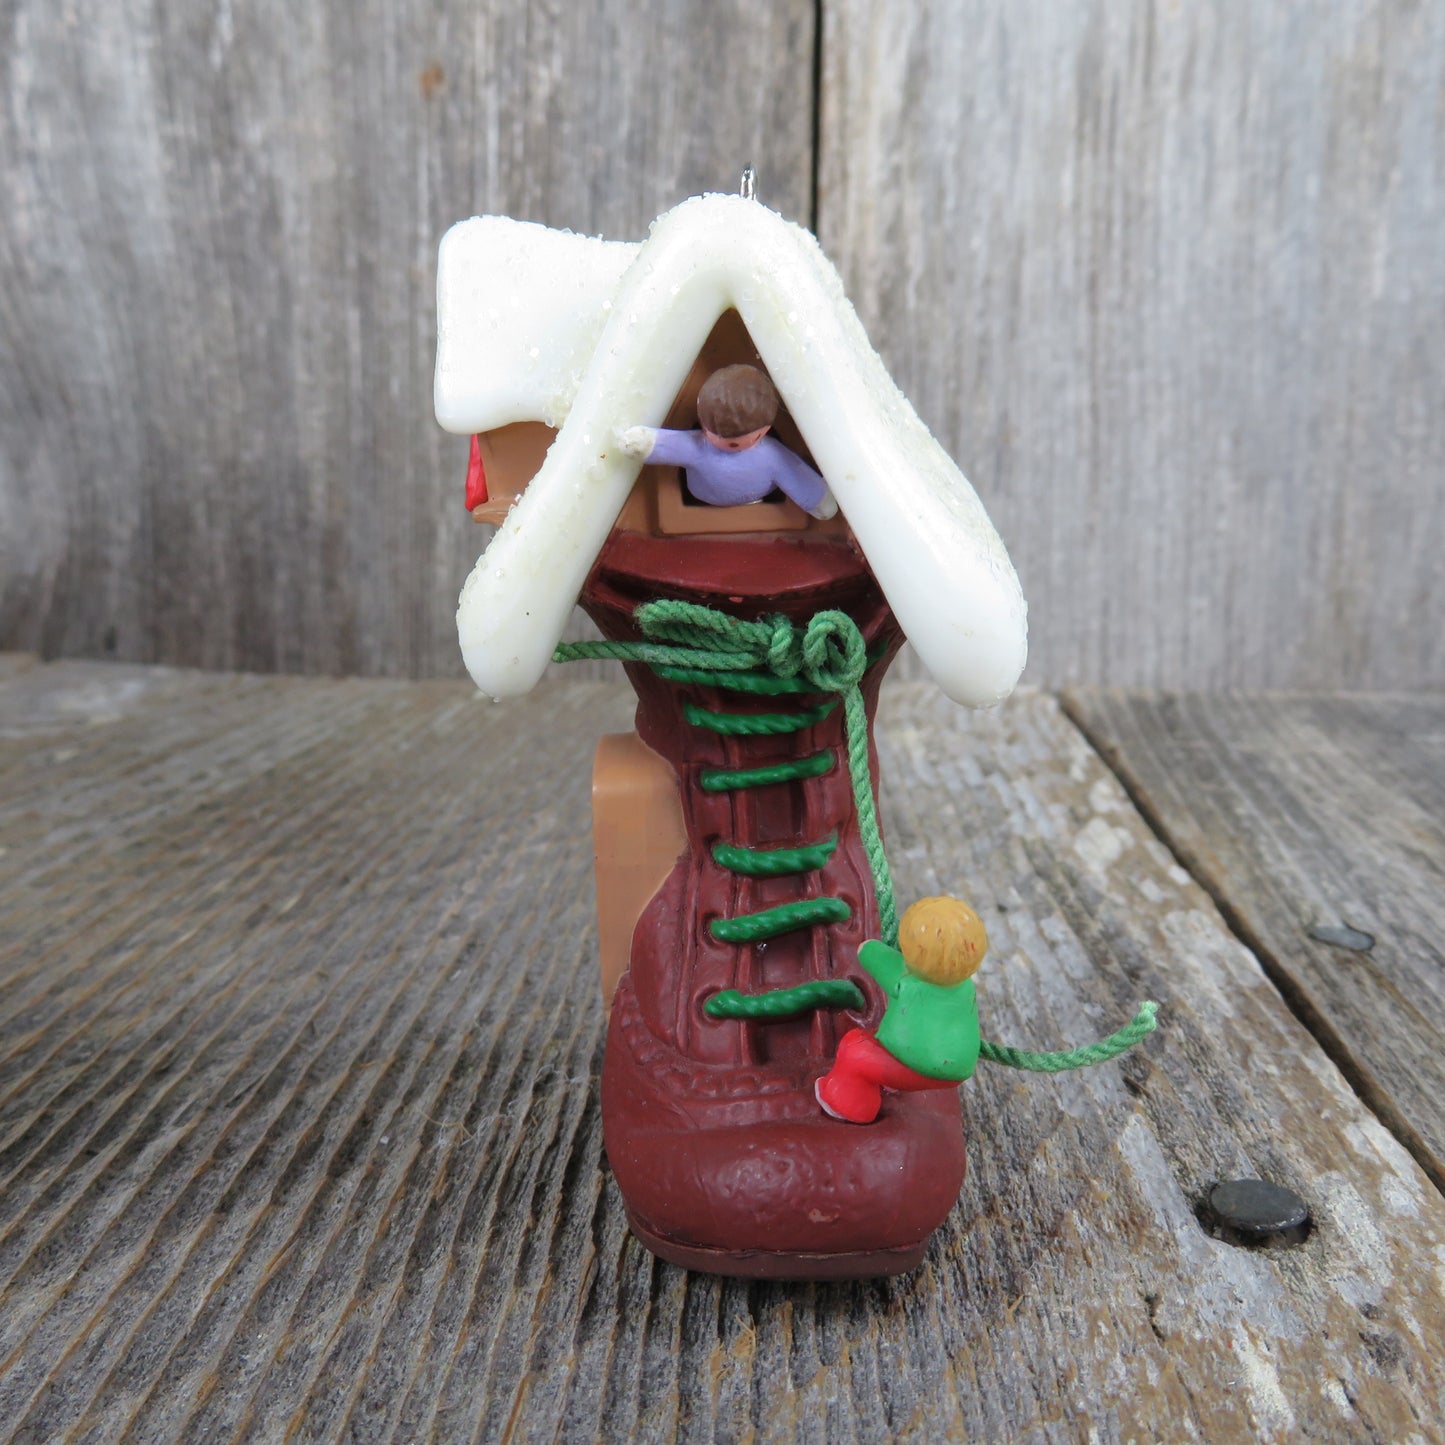 Vintage Boot Shoe Ornament Old Woman Who Lived in a Shoe Hallmark Christmas 1985 Nursery Rhyme Ornament - At Grandma's Table